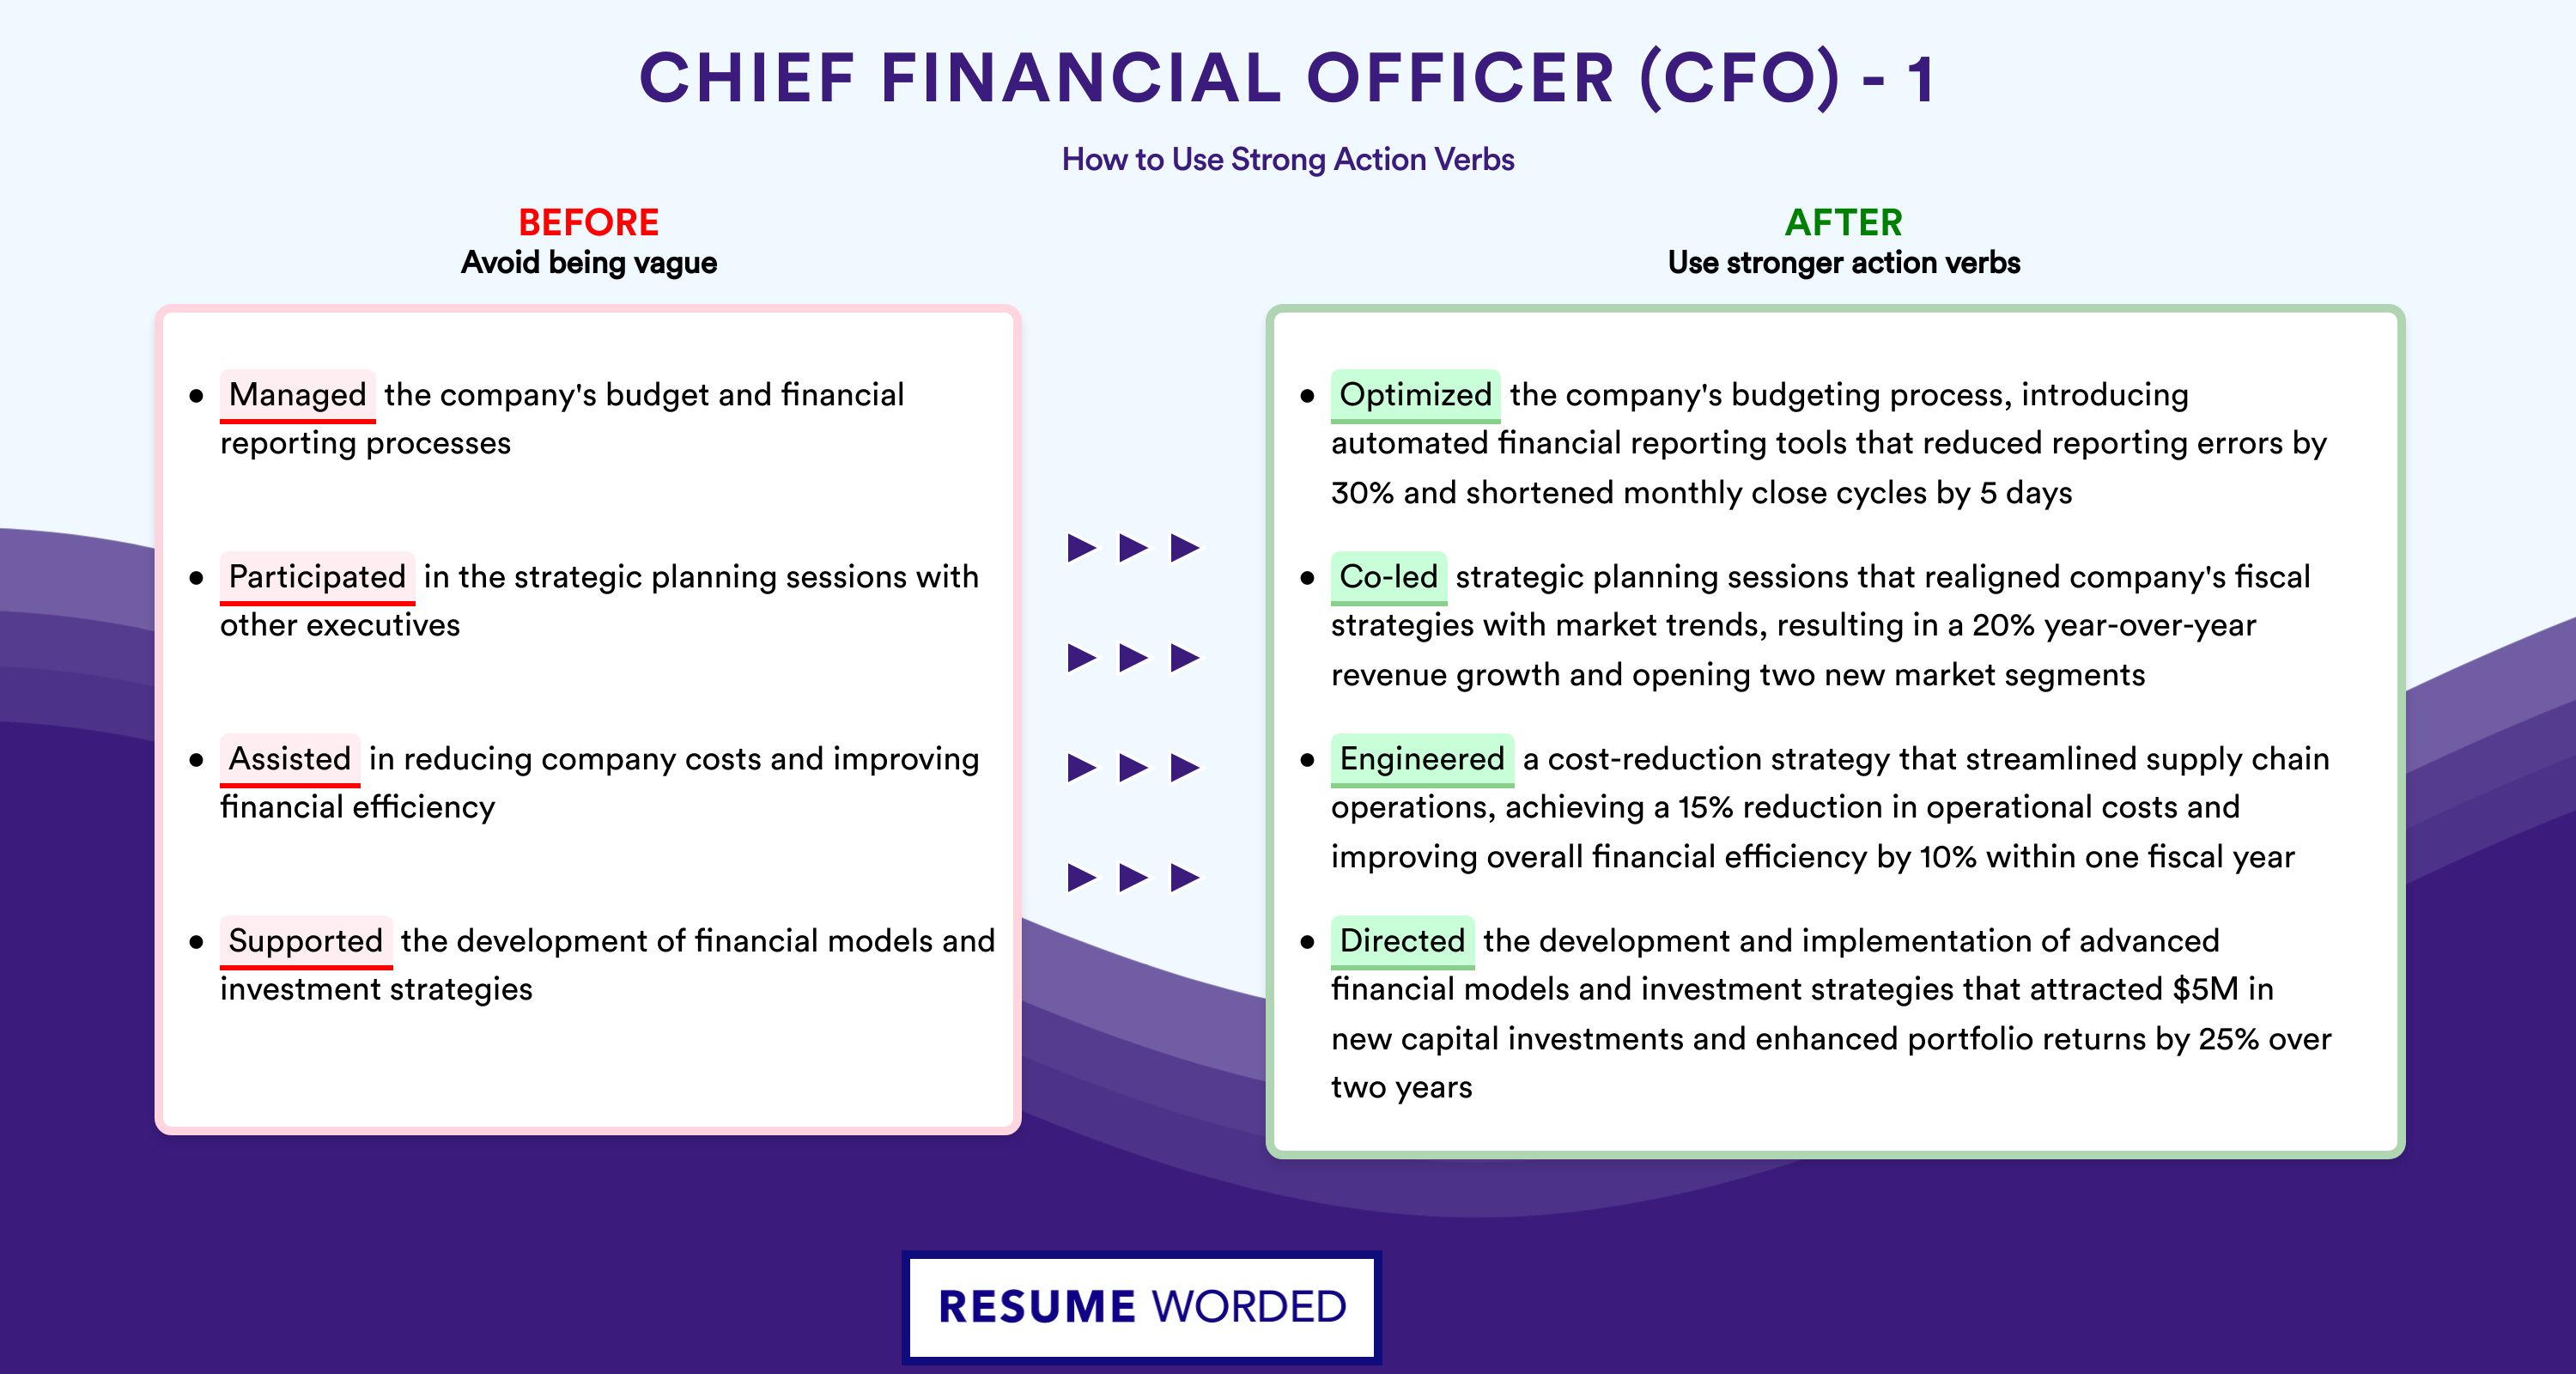 Action Verbs for Chief Financial Officer (CFO) - 1